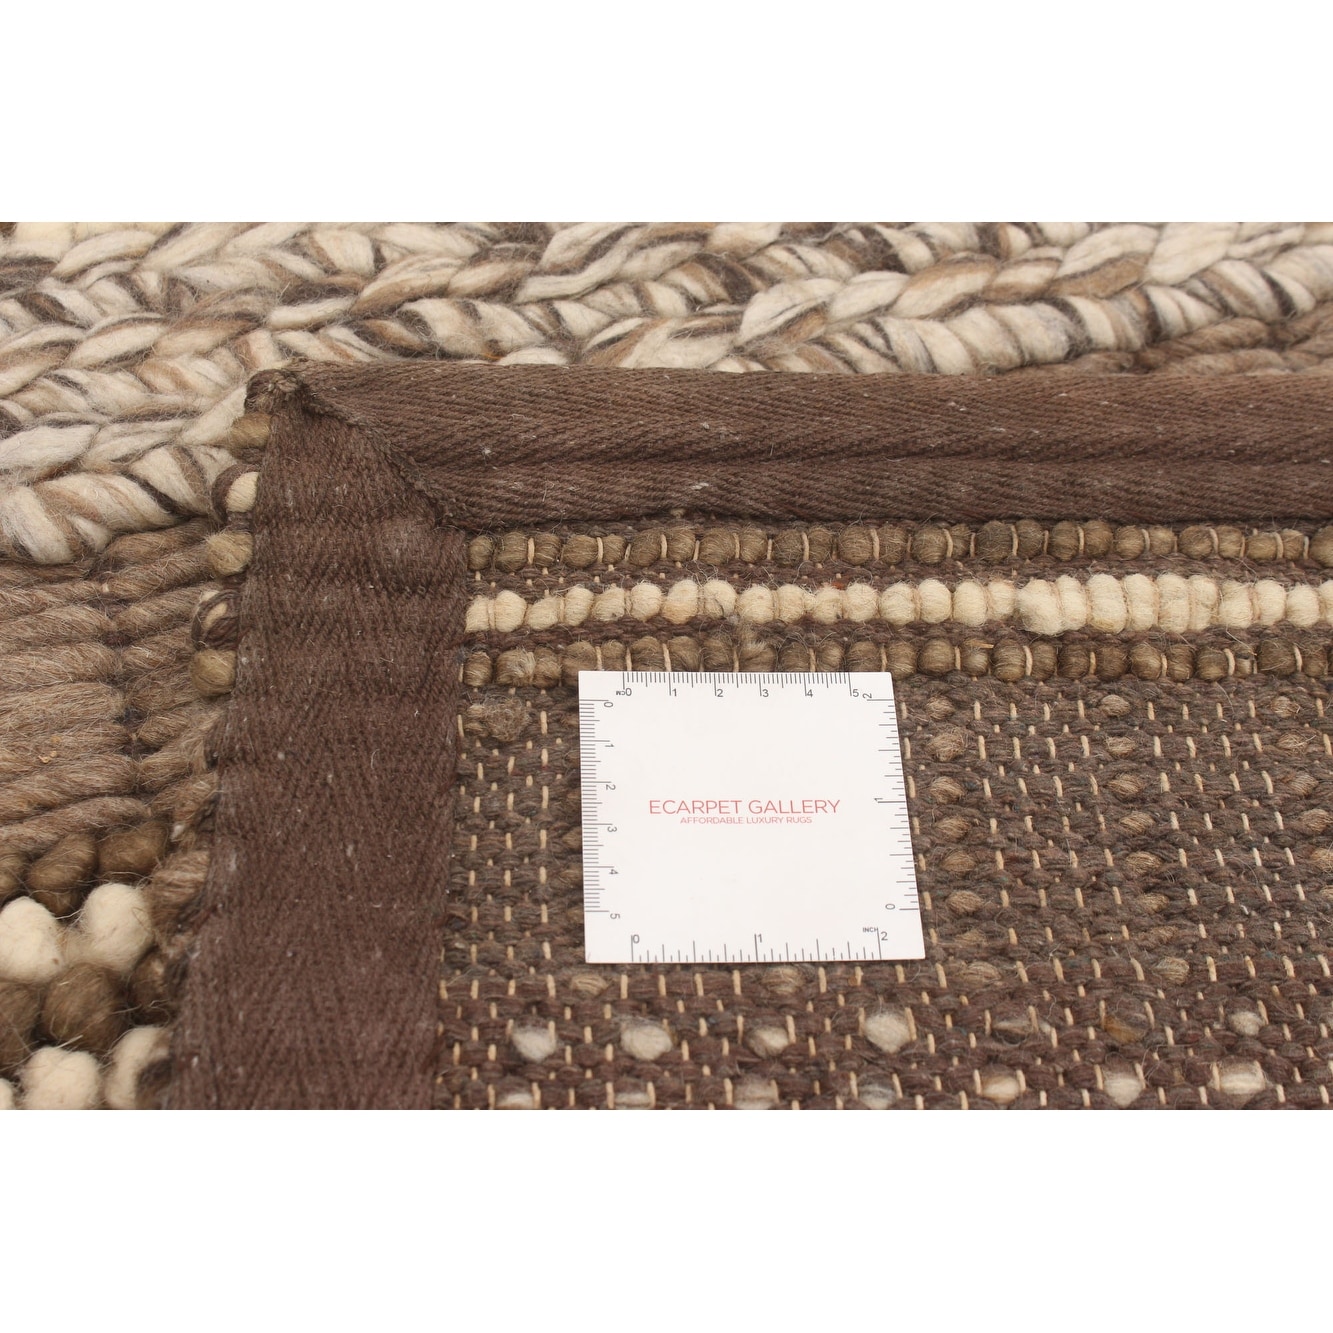 Bedroom 349389 Area Rug for Living Room eCarpet Gallery Hand-Knotted Sienna Braided Brown Rug 4'9 x 7'10 